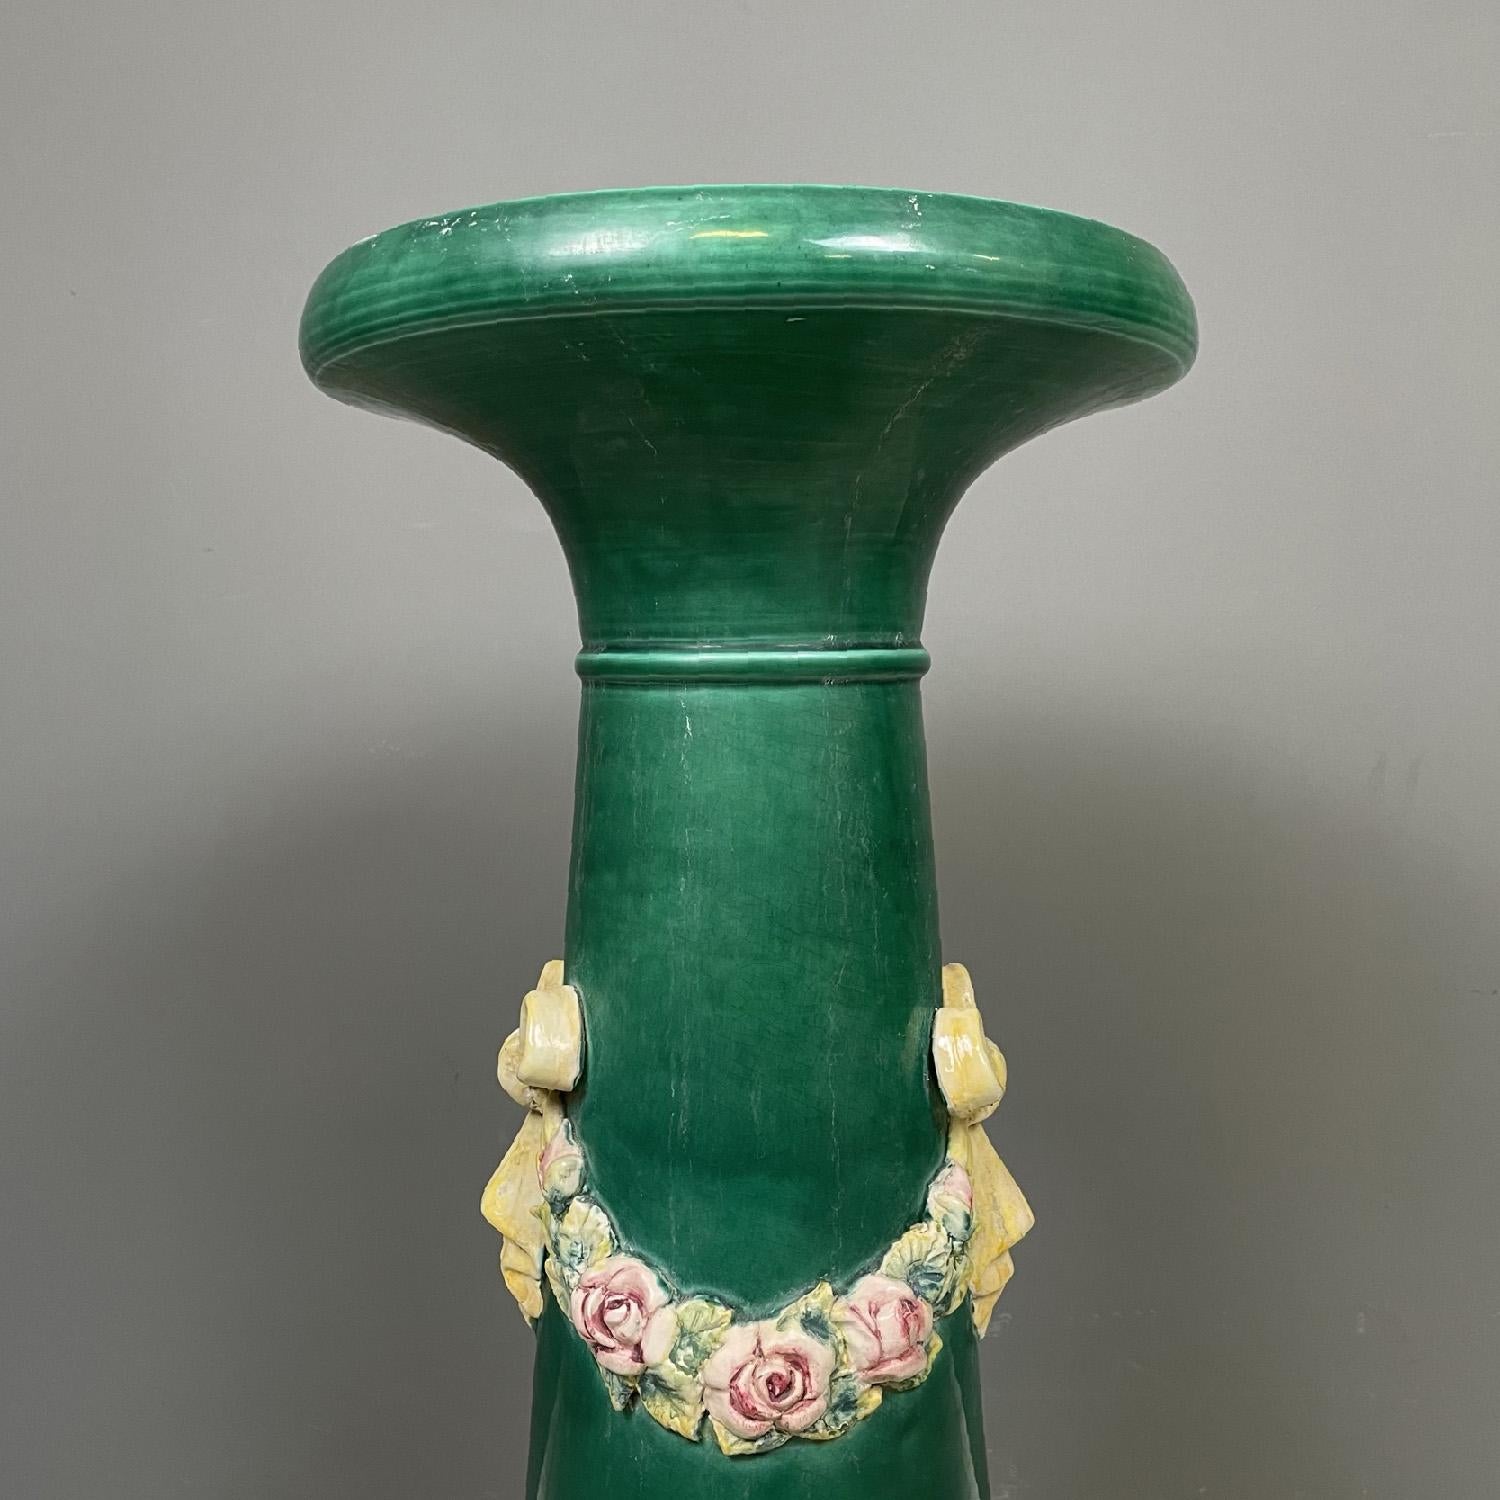 Italian imperial style green ceramic columns pedestals bows and flowers, 1930s For Sale 1